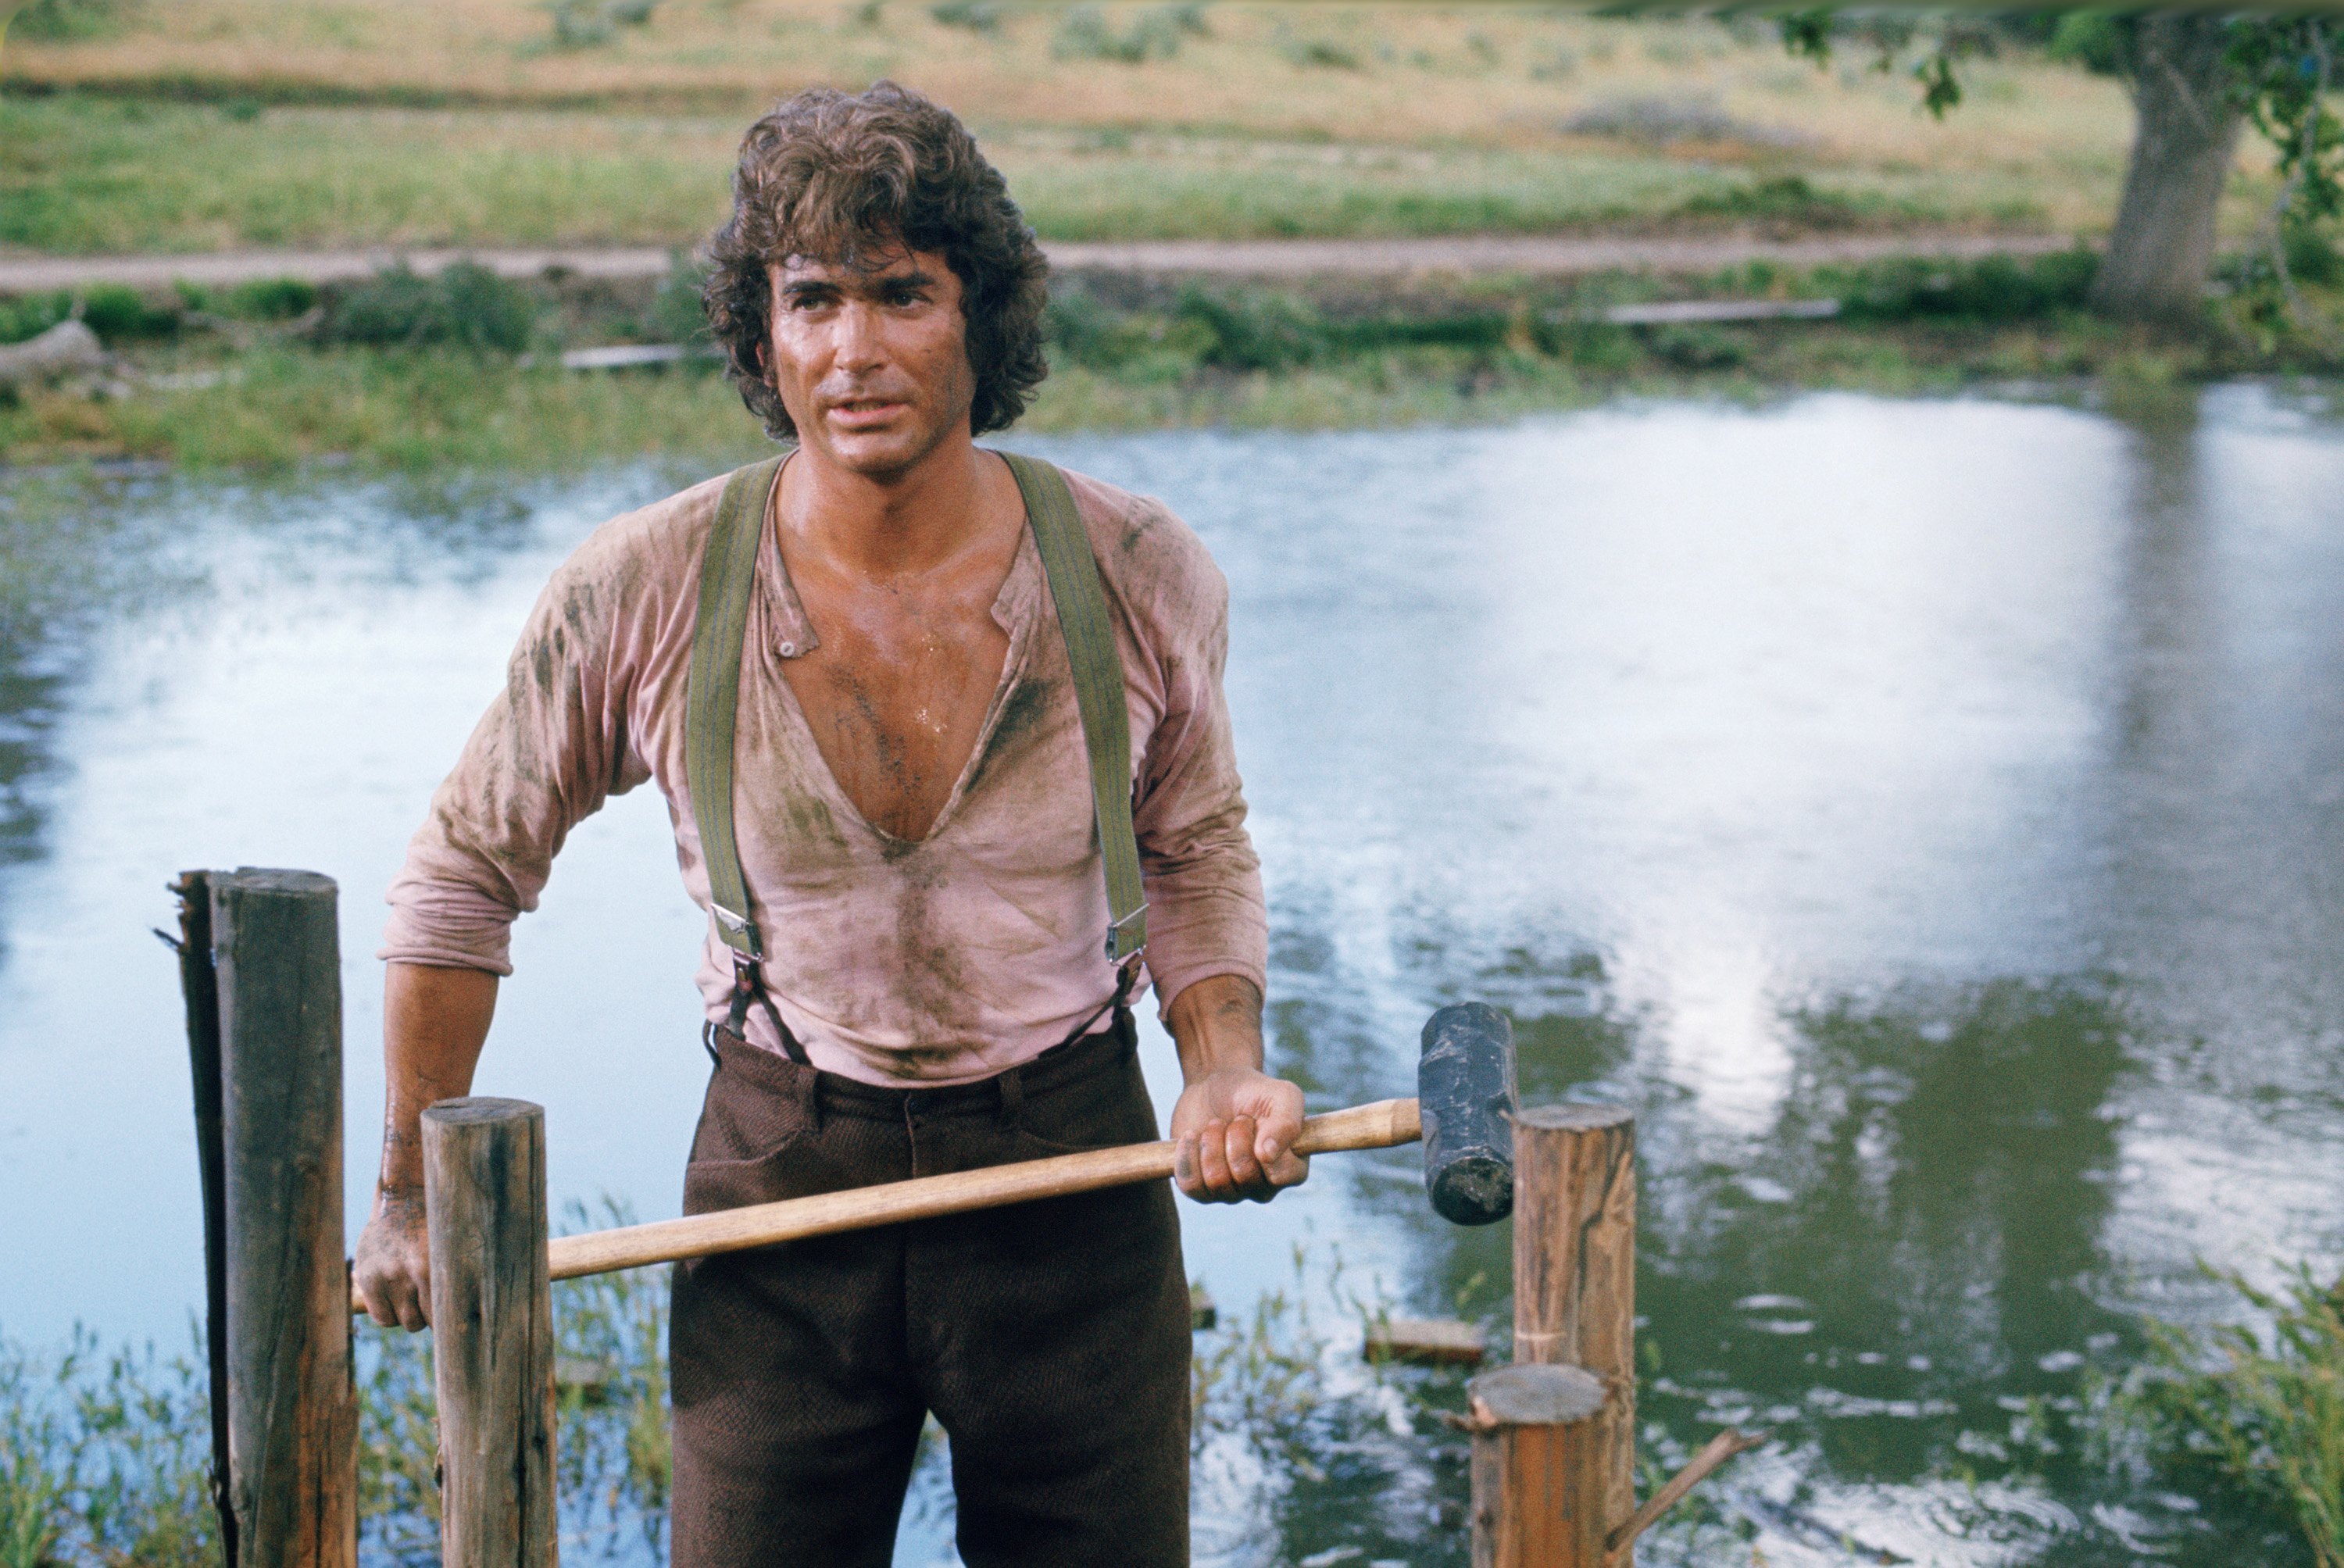 Michael Landon holds an ax while on the Little House on the Prairie set.